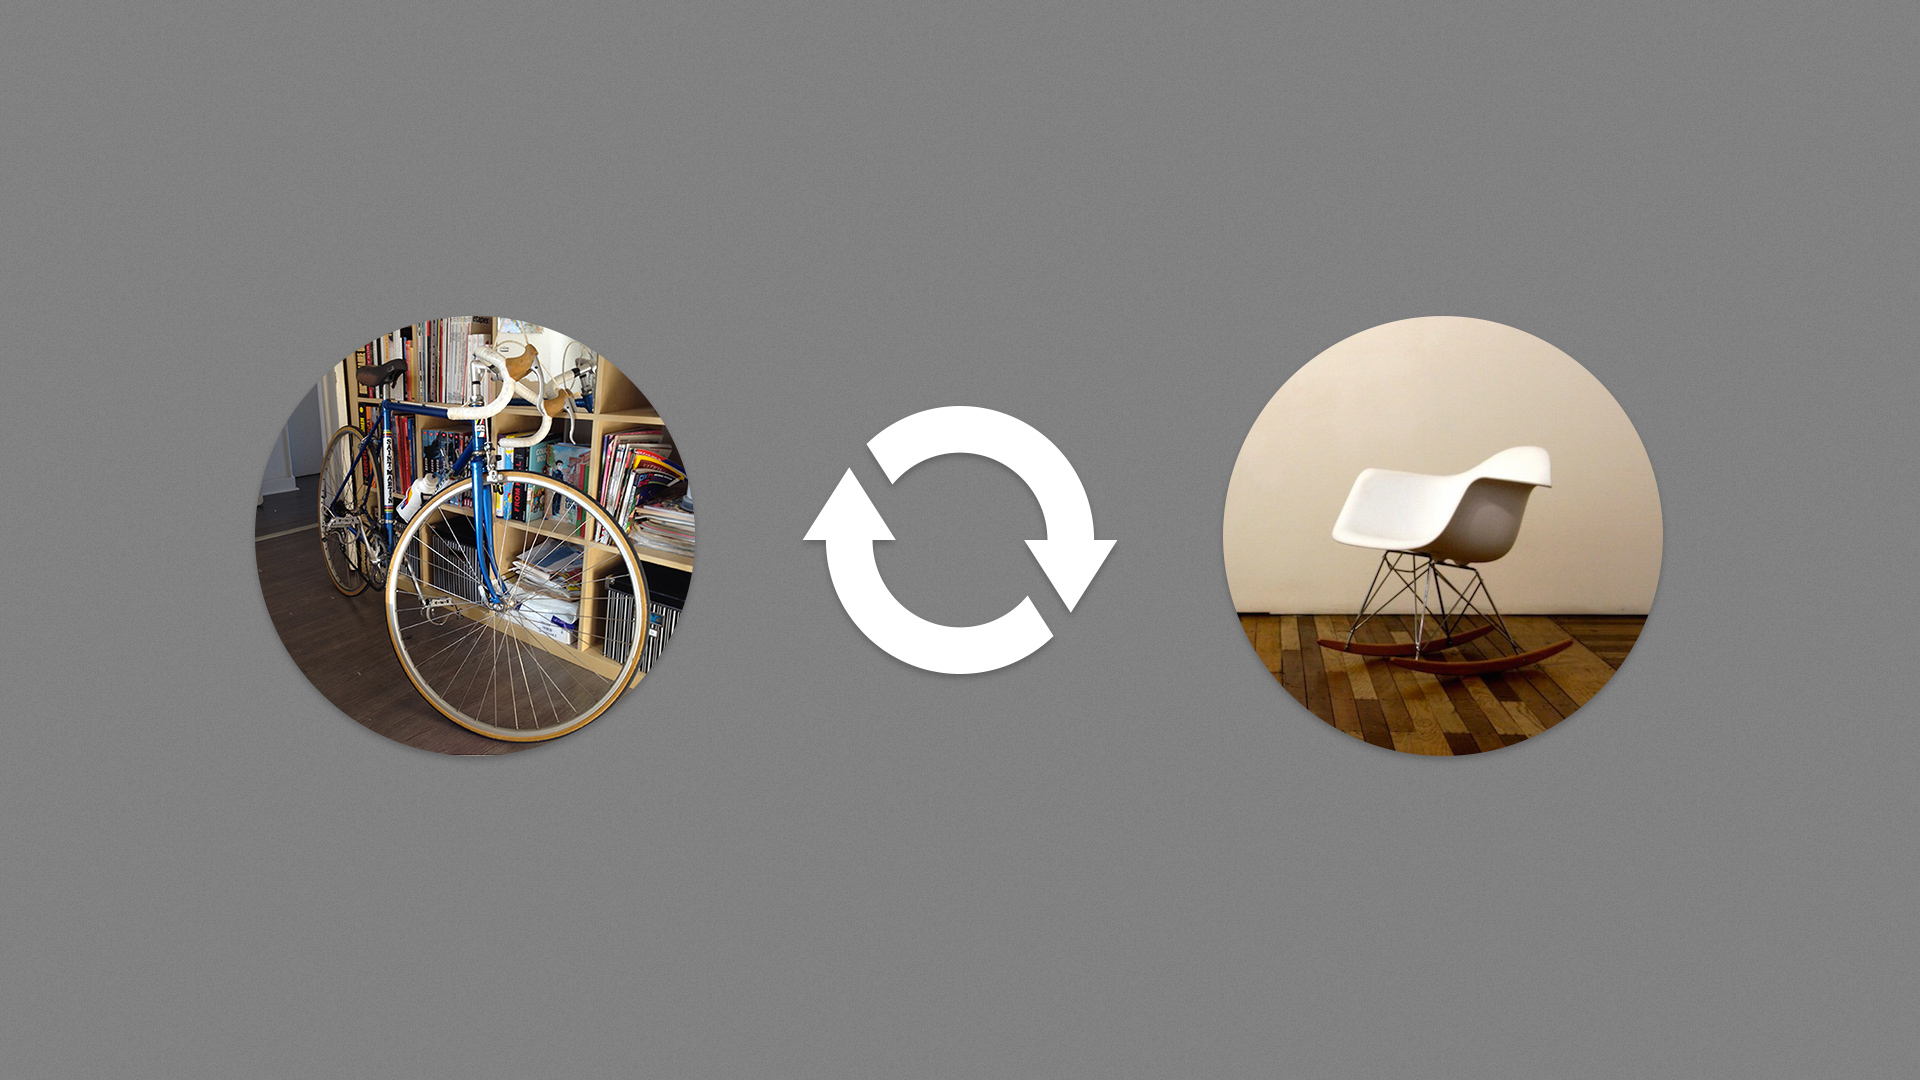 A photography of a bike on the left, two arrows in circle on the center, and a photography of a design chair on the right.